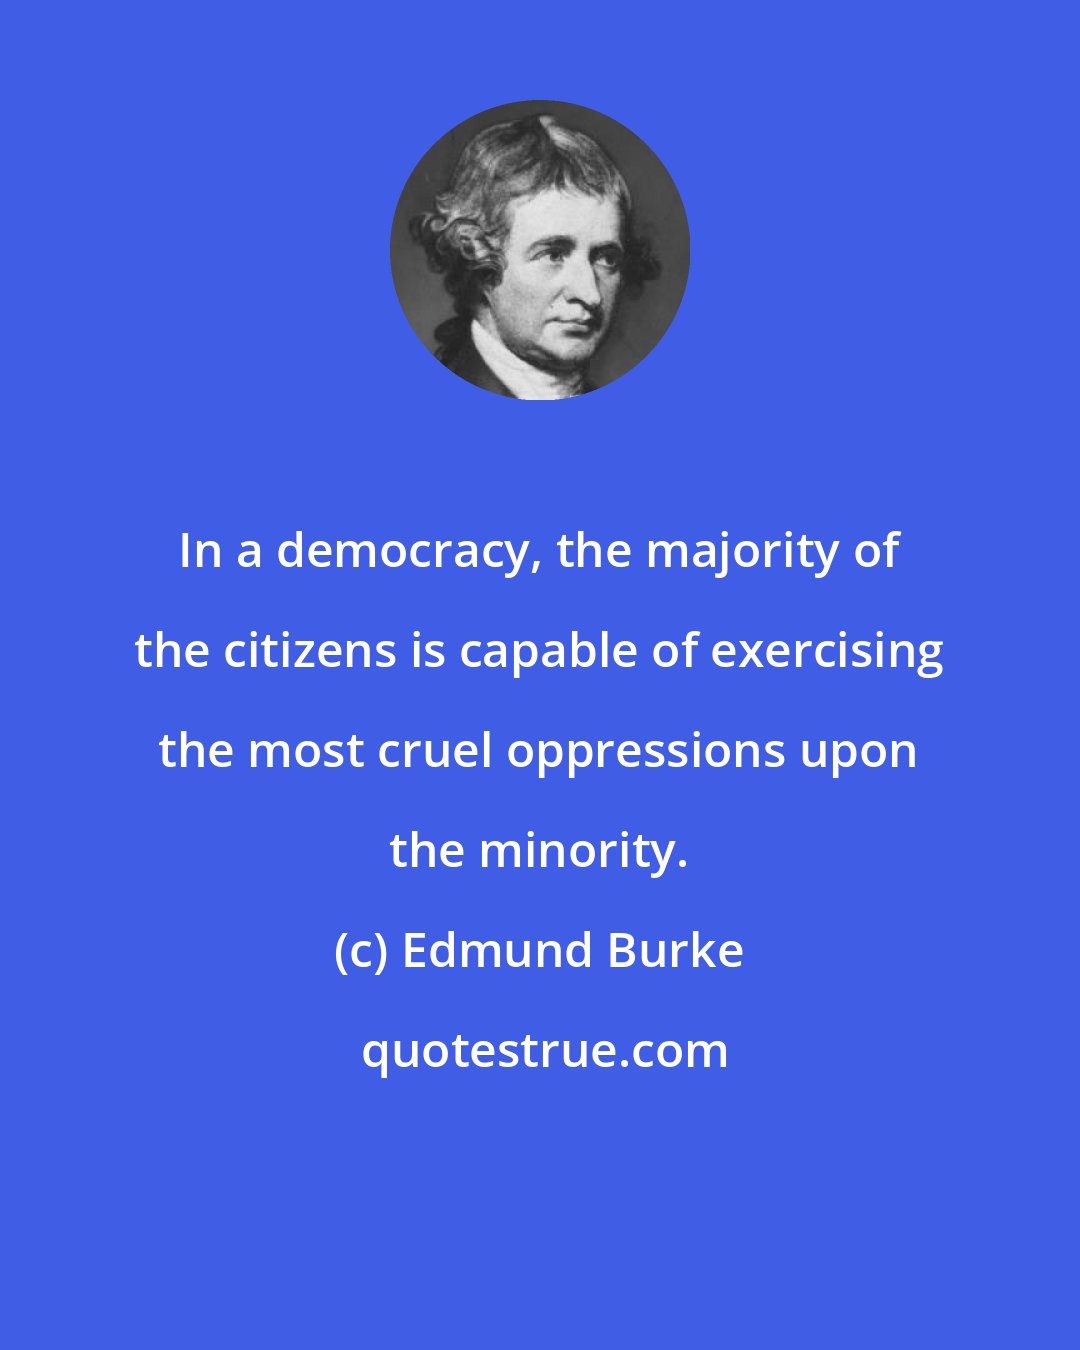 Edmund Burke: In a democracy, the majority of the citizens is capable of exercising the most cruel oppressions upon the minority.